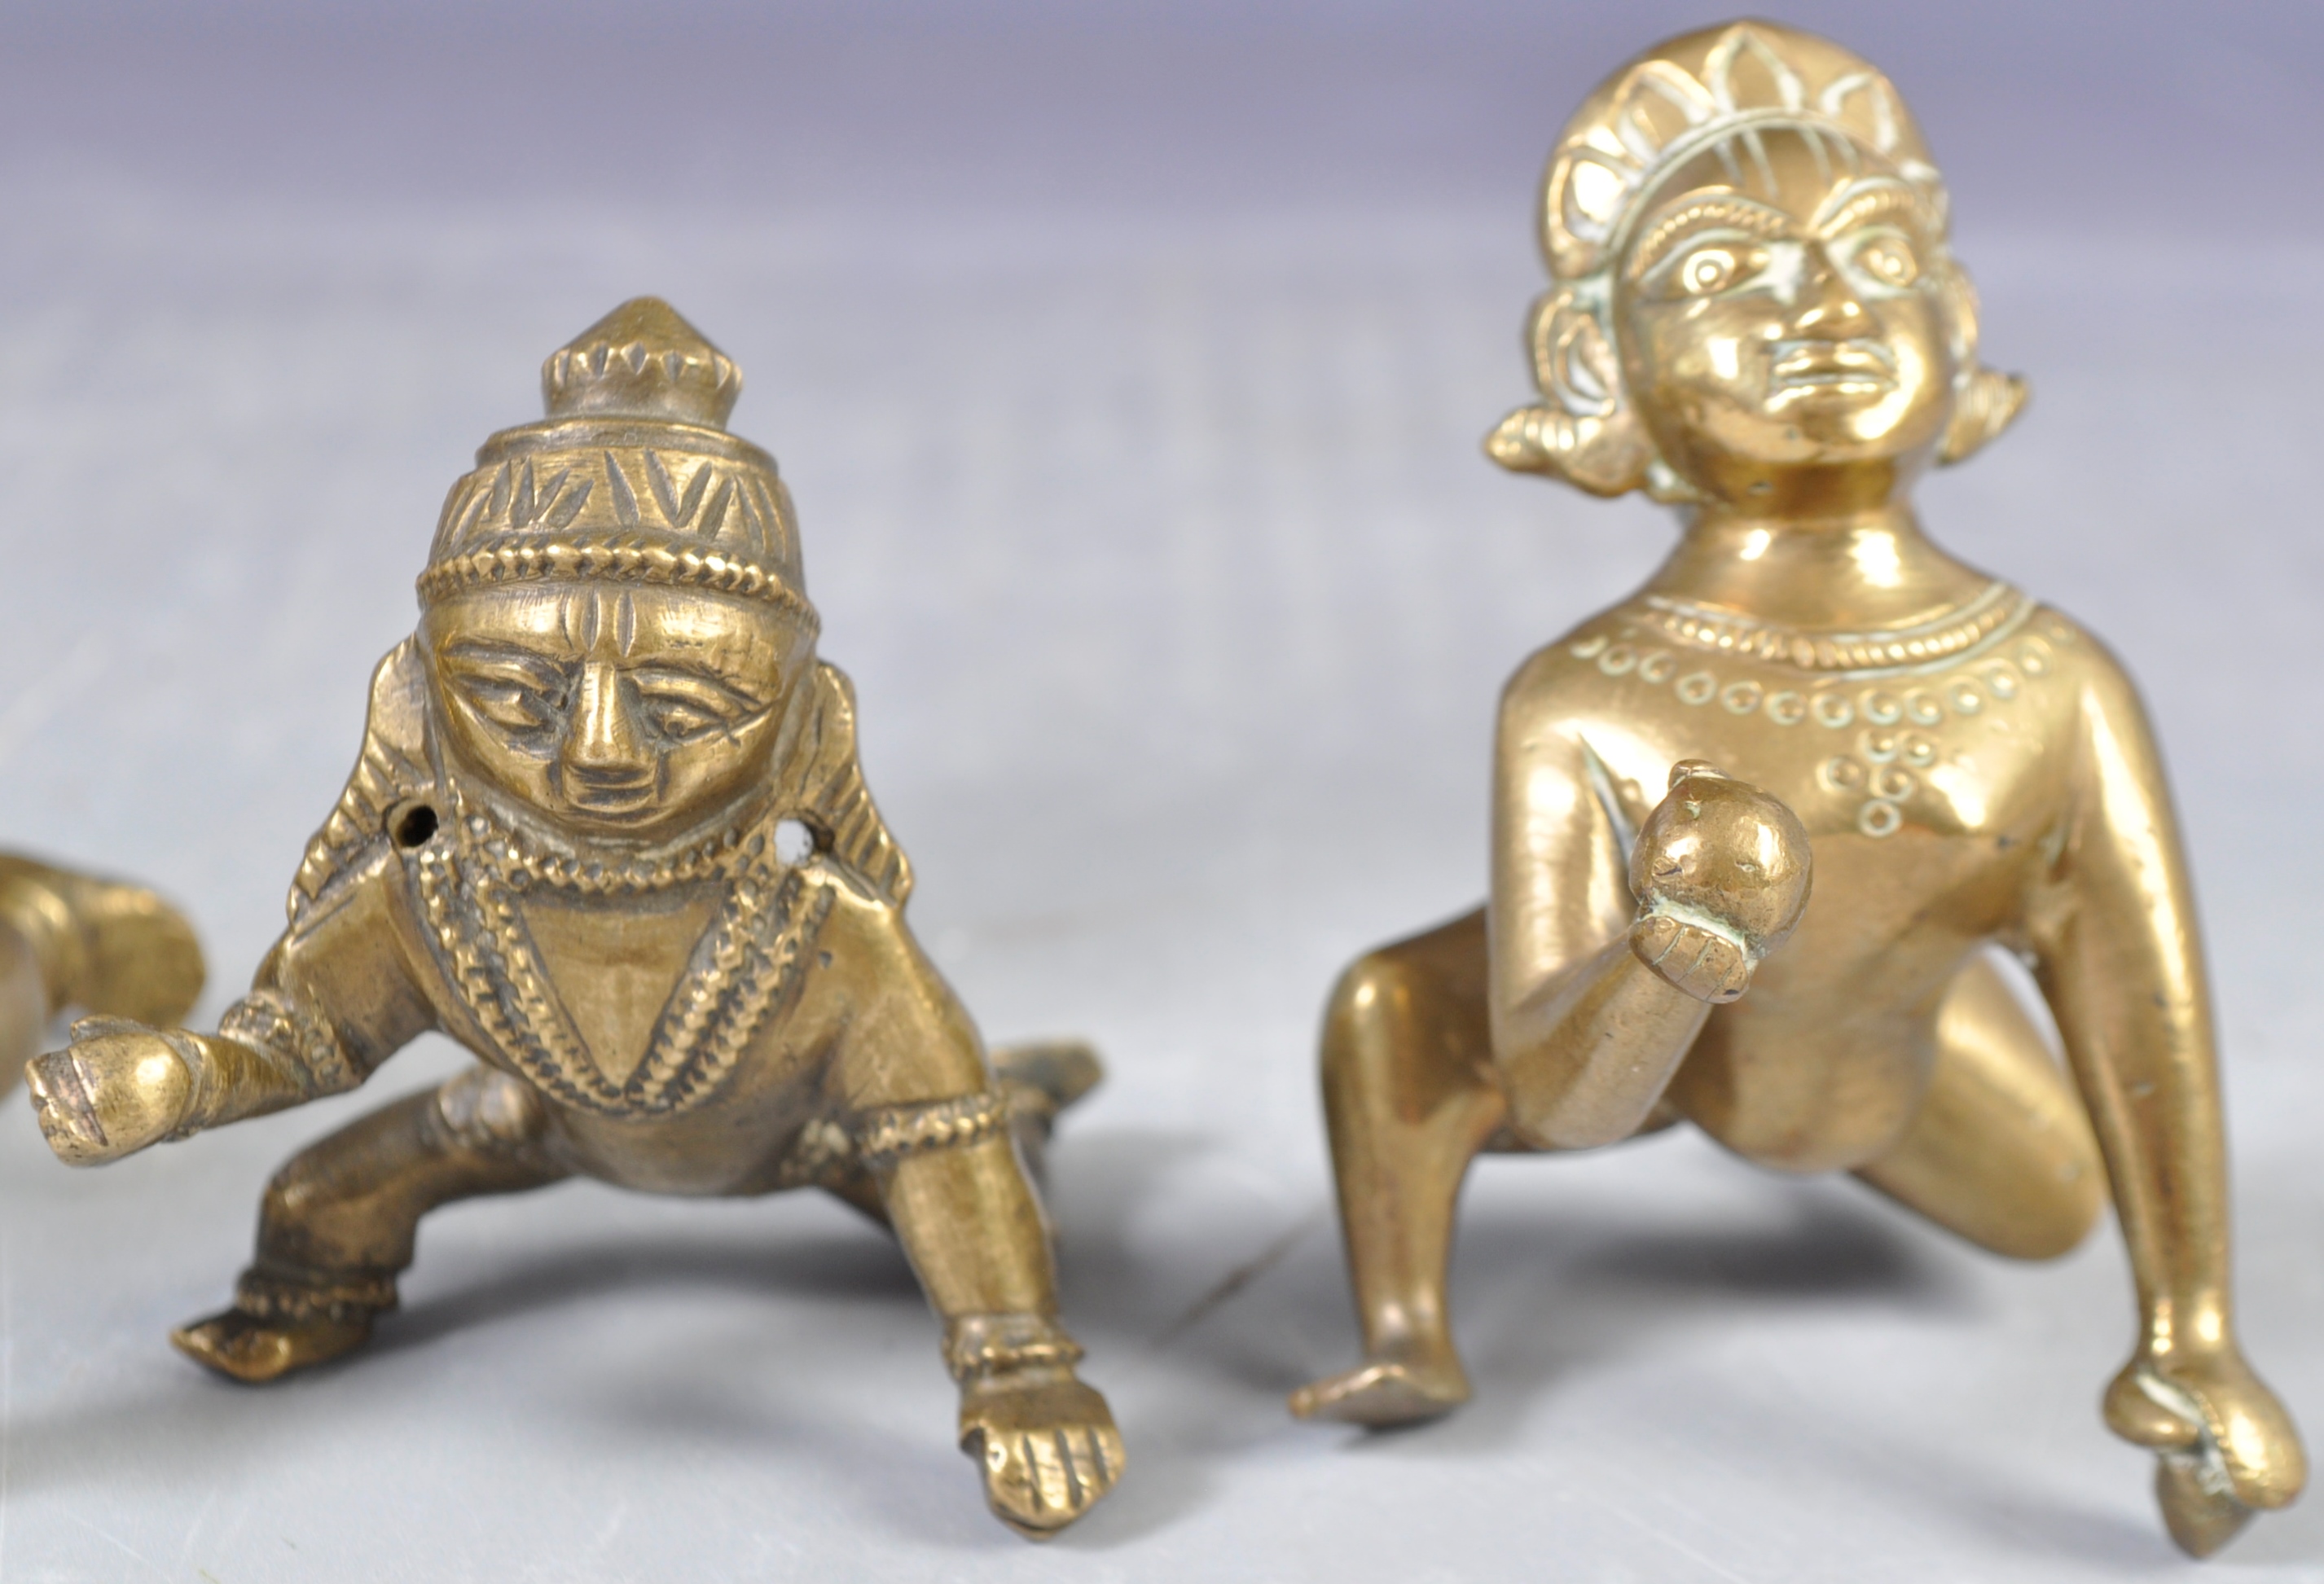 COLLECTION OF ANTIQUE FIGURES OF BOY KRISHNA AND BUTTER BALL - Image 2 of 5